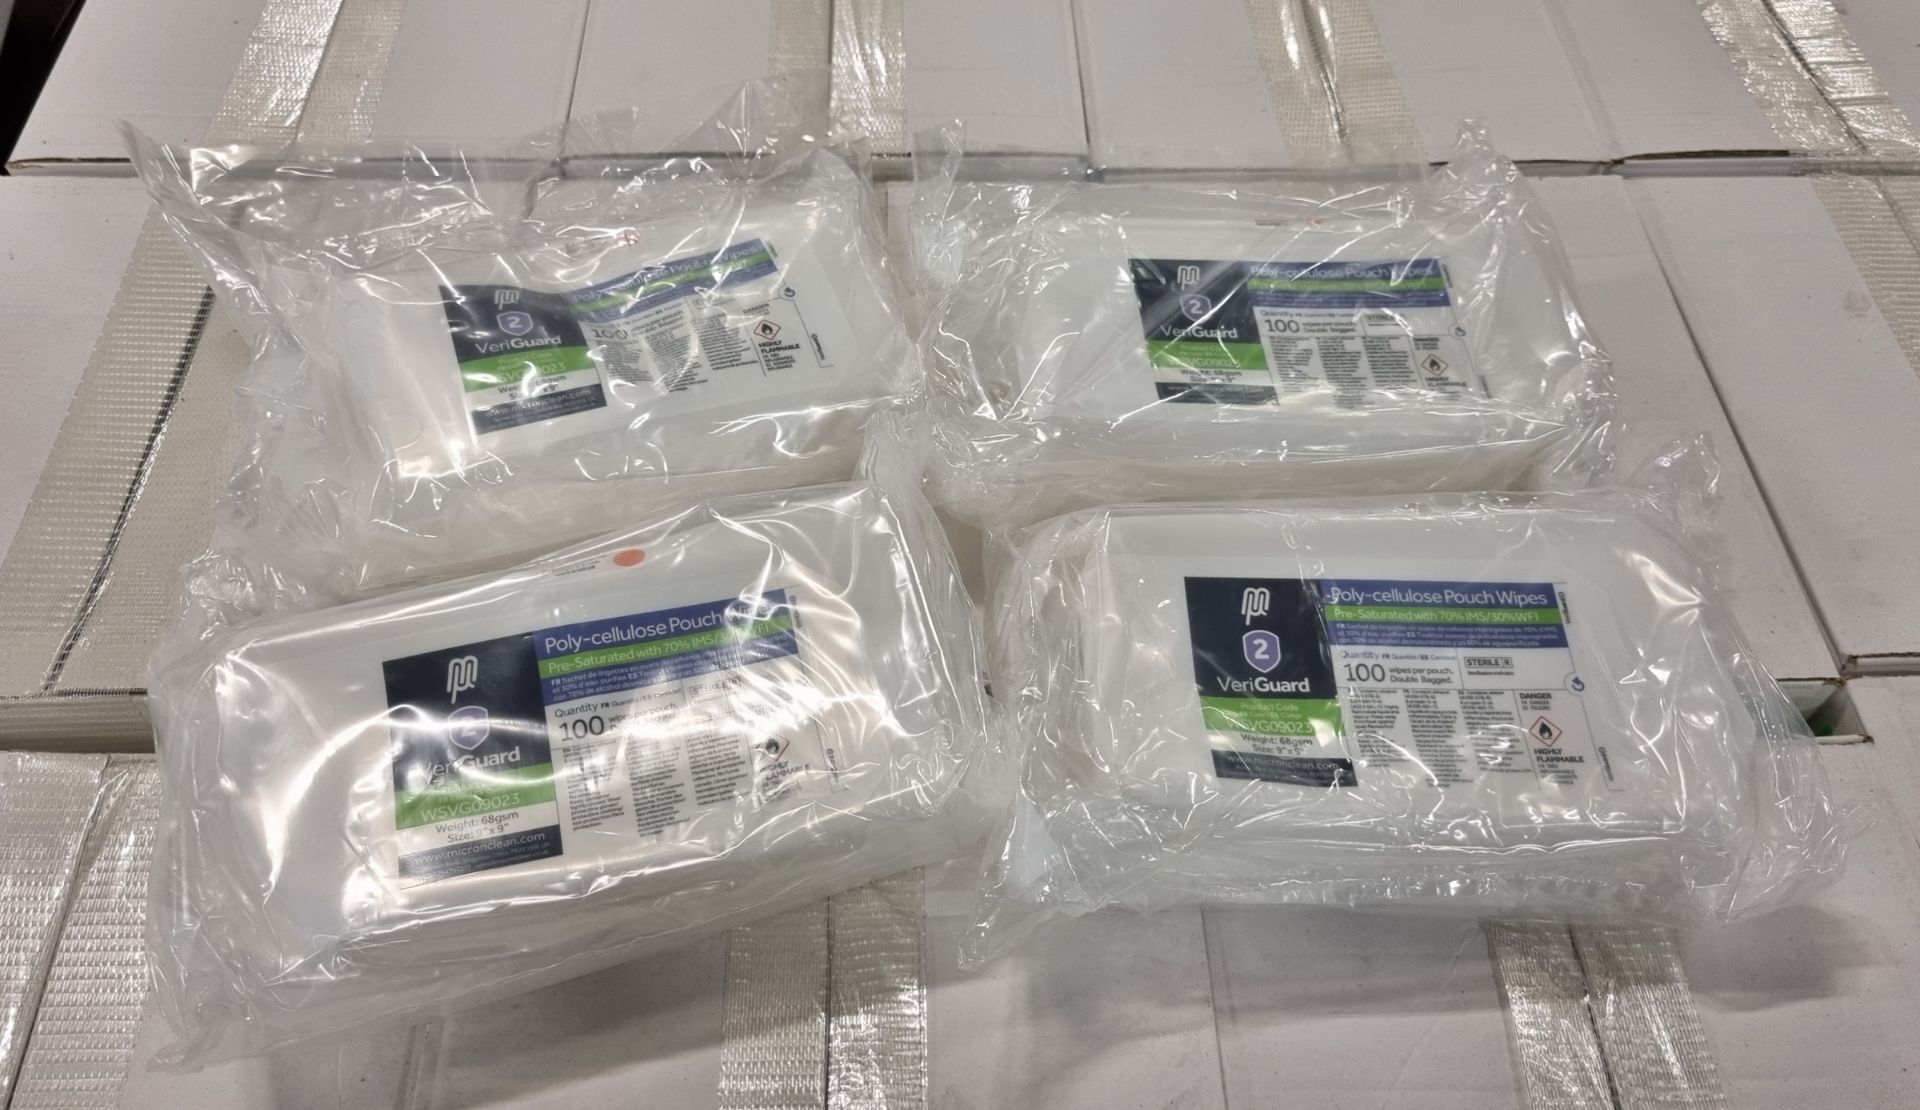 24x boxes of Micronclean Veriguard Polycellulose C-folded pouch sterile wipes - 230mm x 230mm - Bild 2 aus 4